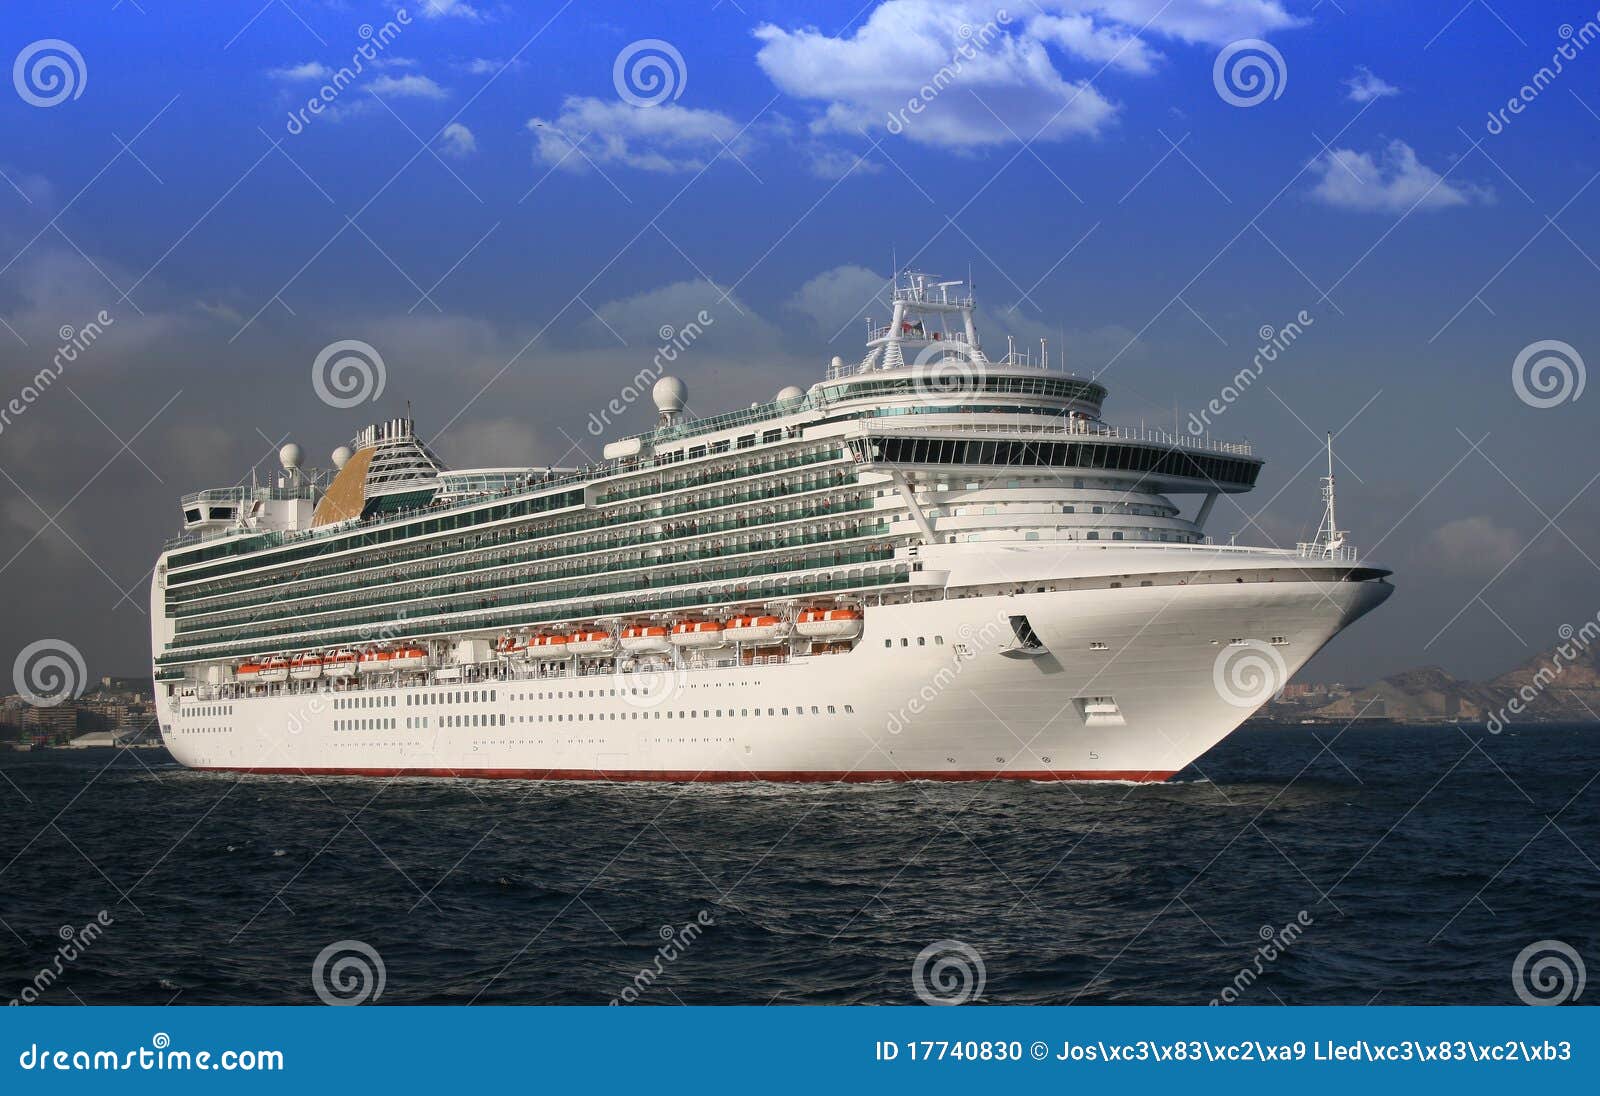 Starboard side stock photo. Image of postcards, recreation - 17740830